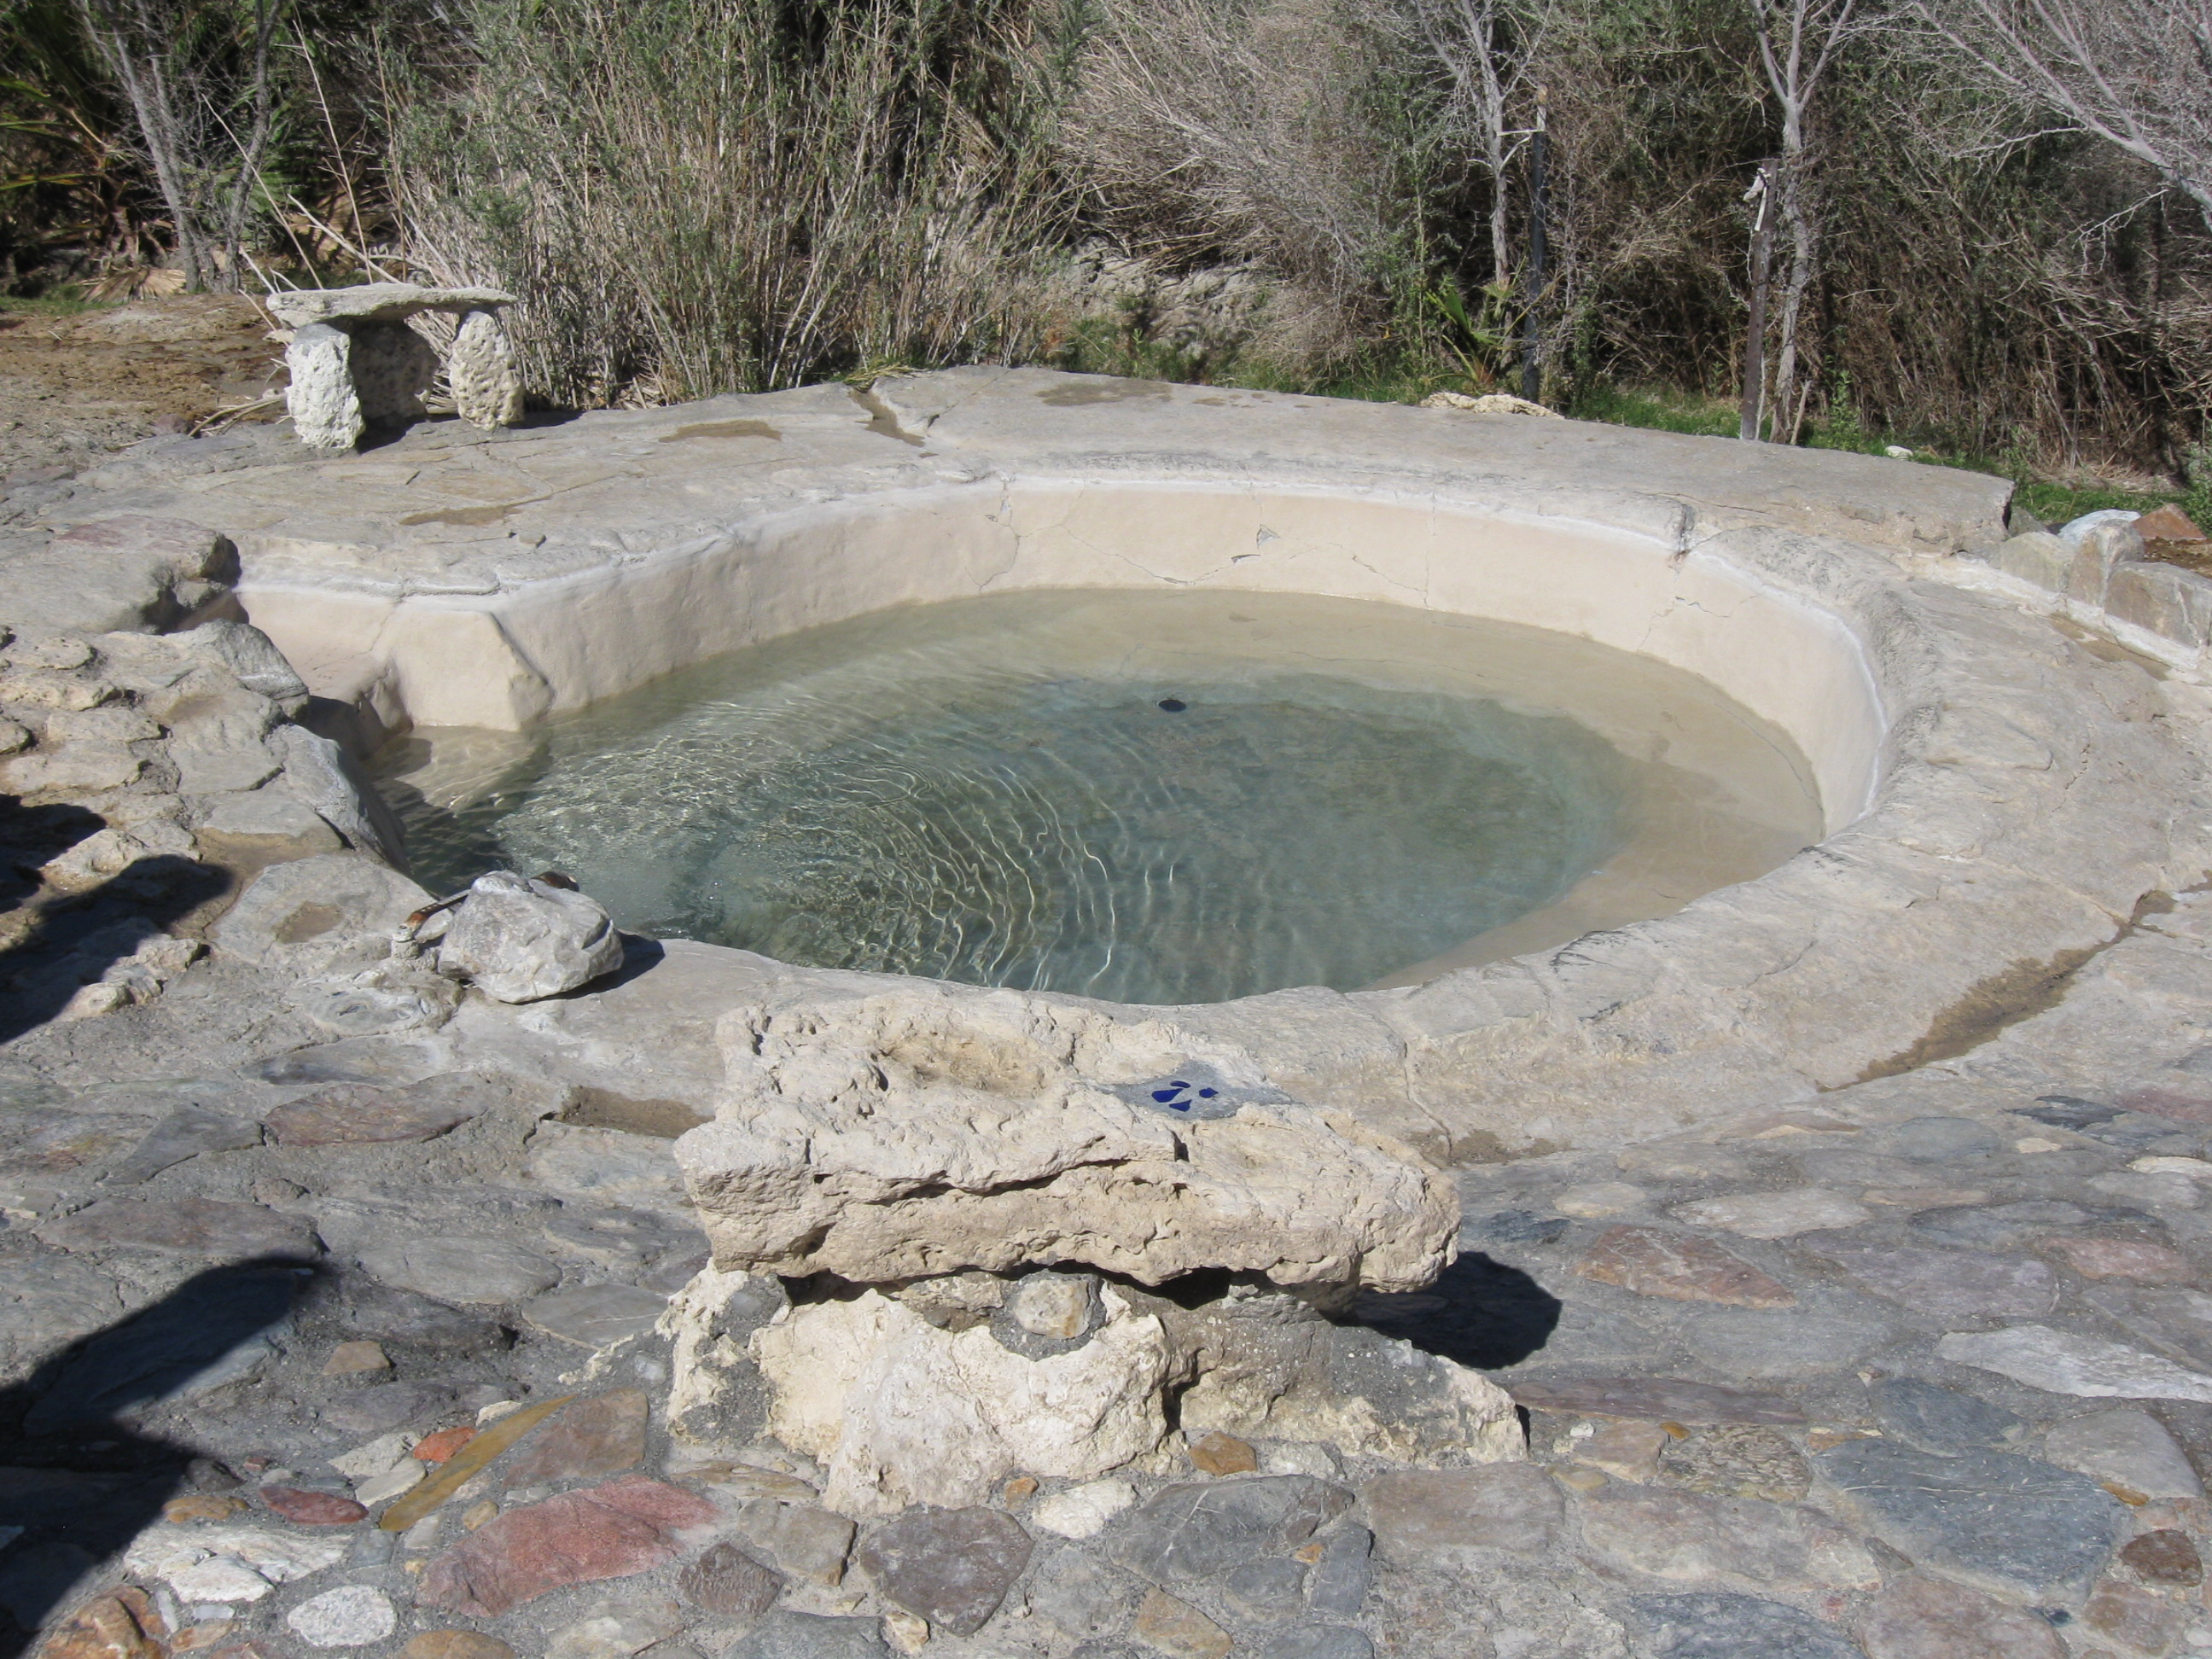 The Sunrise Pool at Saline Valley's Lower Spring is seen as light-colored paving stones surrounding a round stone-lined tub about 10 feet across.